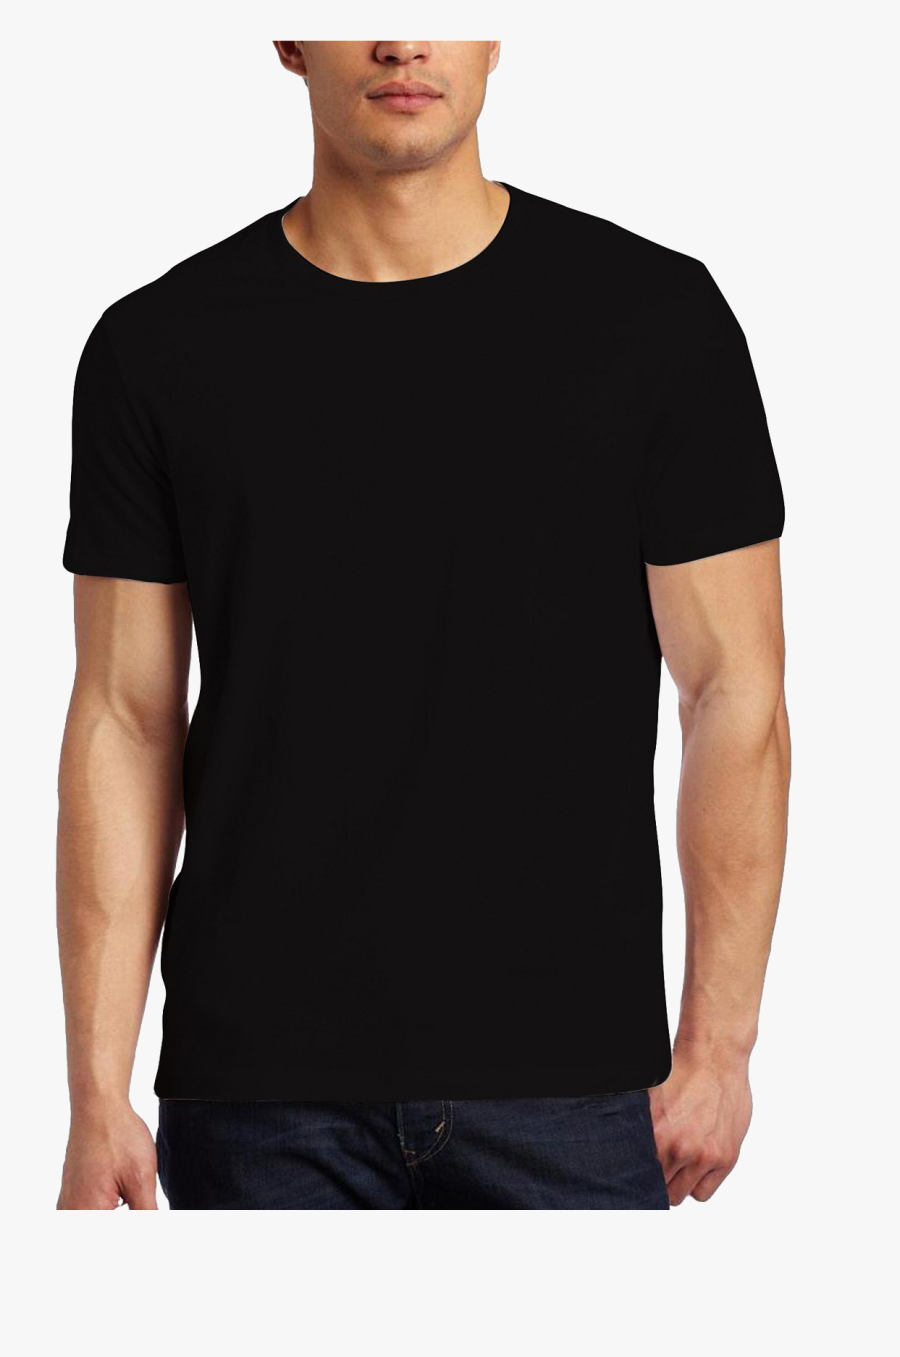 Black T-shirt Png Image Background - Real Black T Shirt Template , Free Transparent Clipart ...